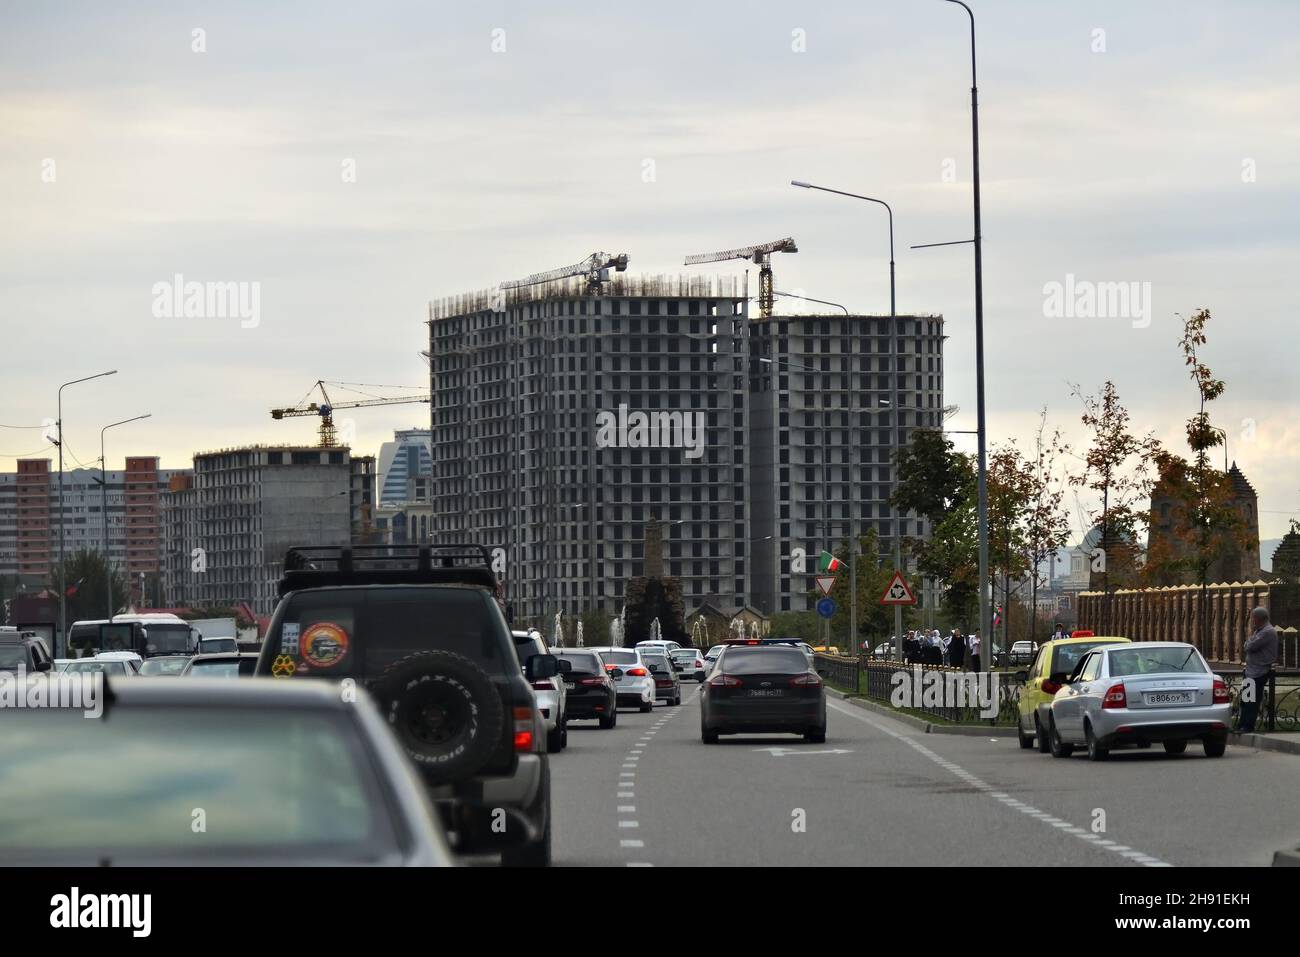 Grozny, Russia - Sept 13, 2021: Evening traffic jam and view on the new construction in capital city of the Chechen Republic in the Russian Federation Stock Photo